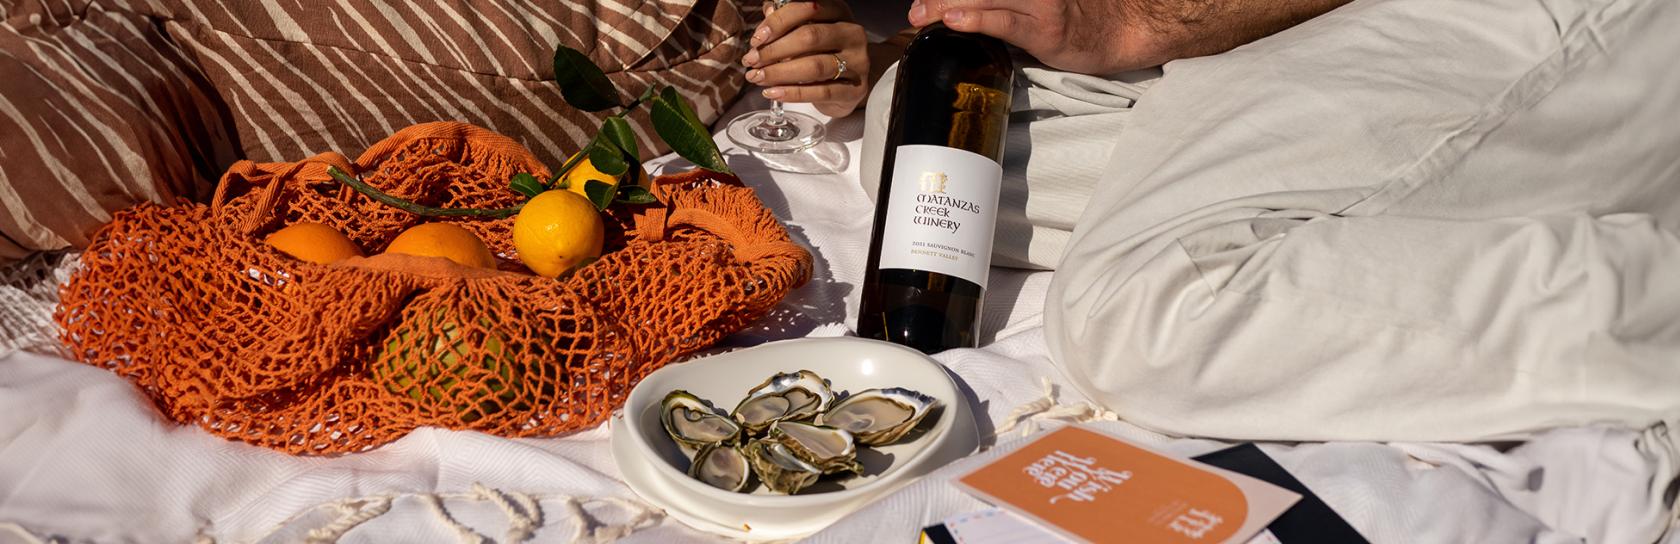 Oysters and Sauvignon Blanc Pairing